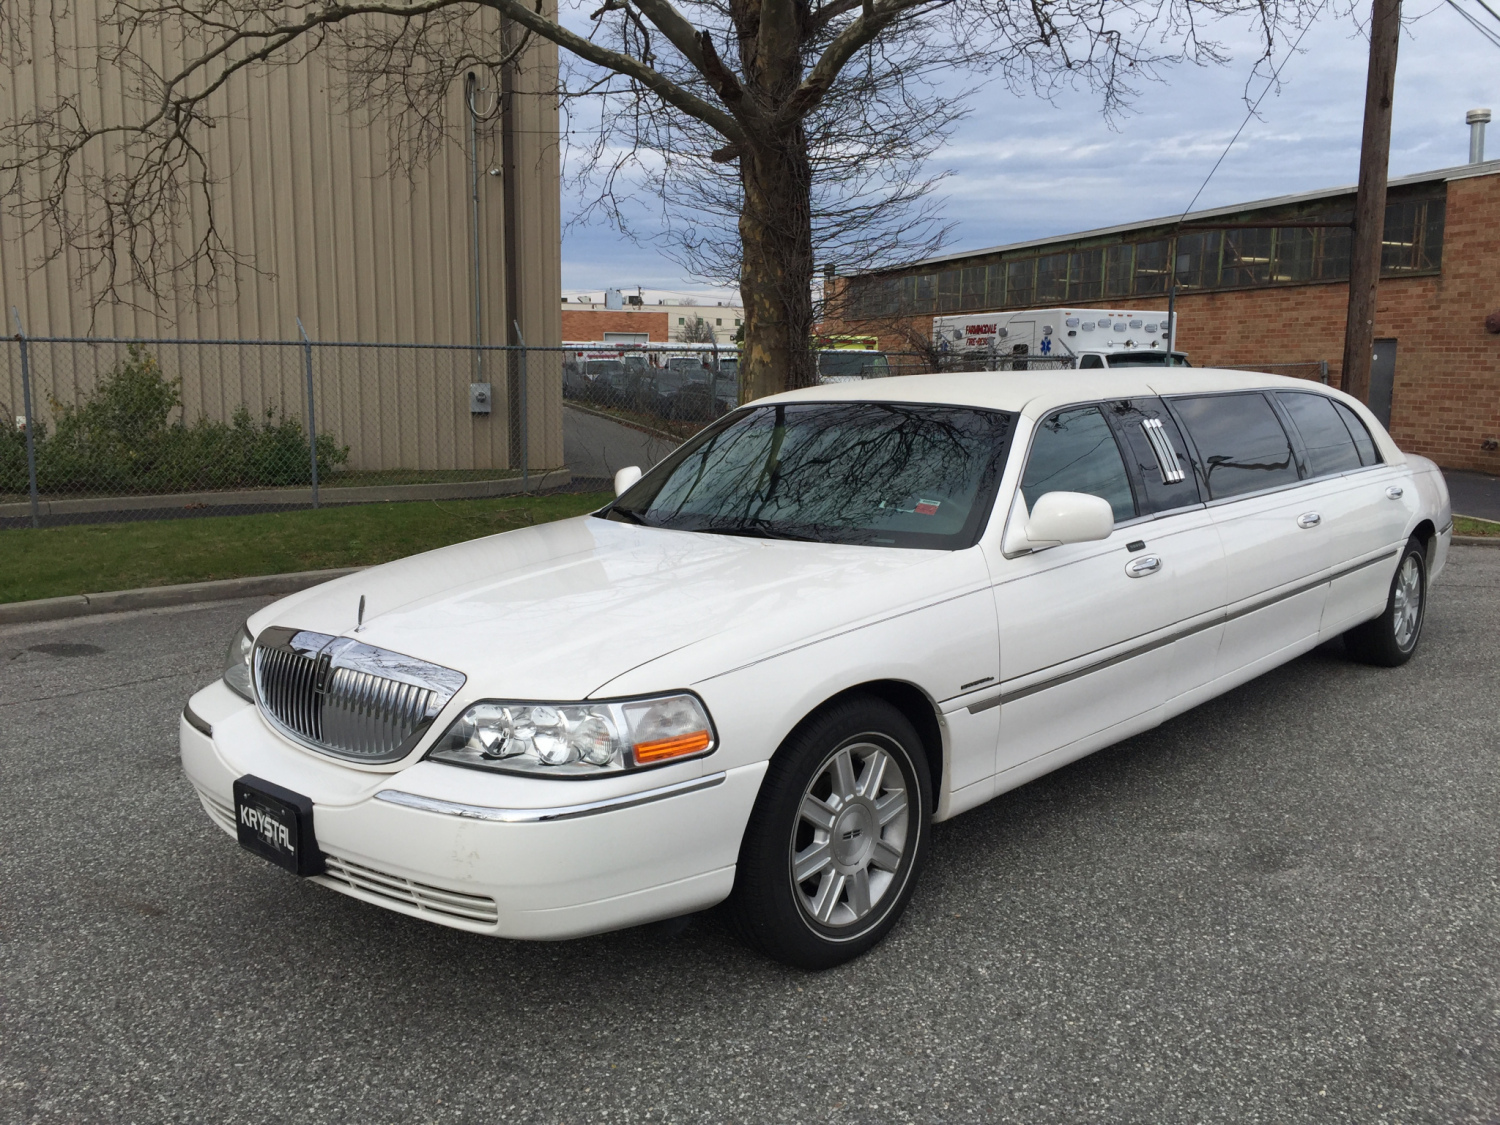 Where can you find a used funeral limousine?